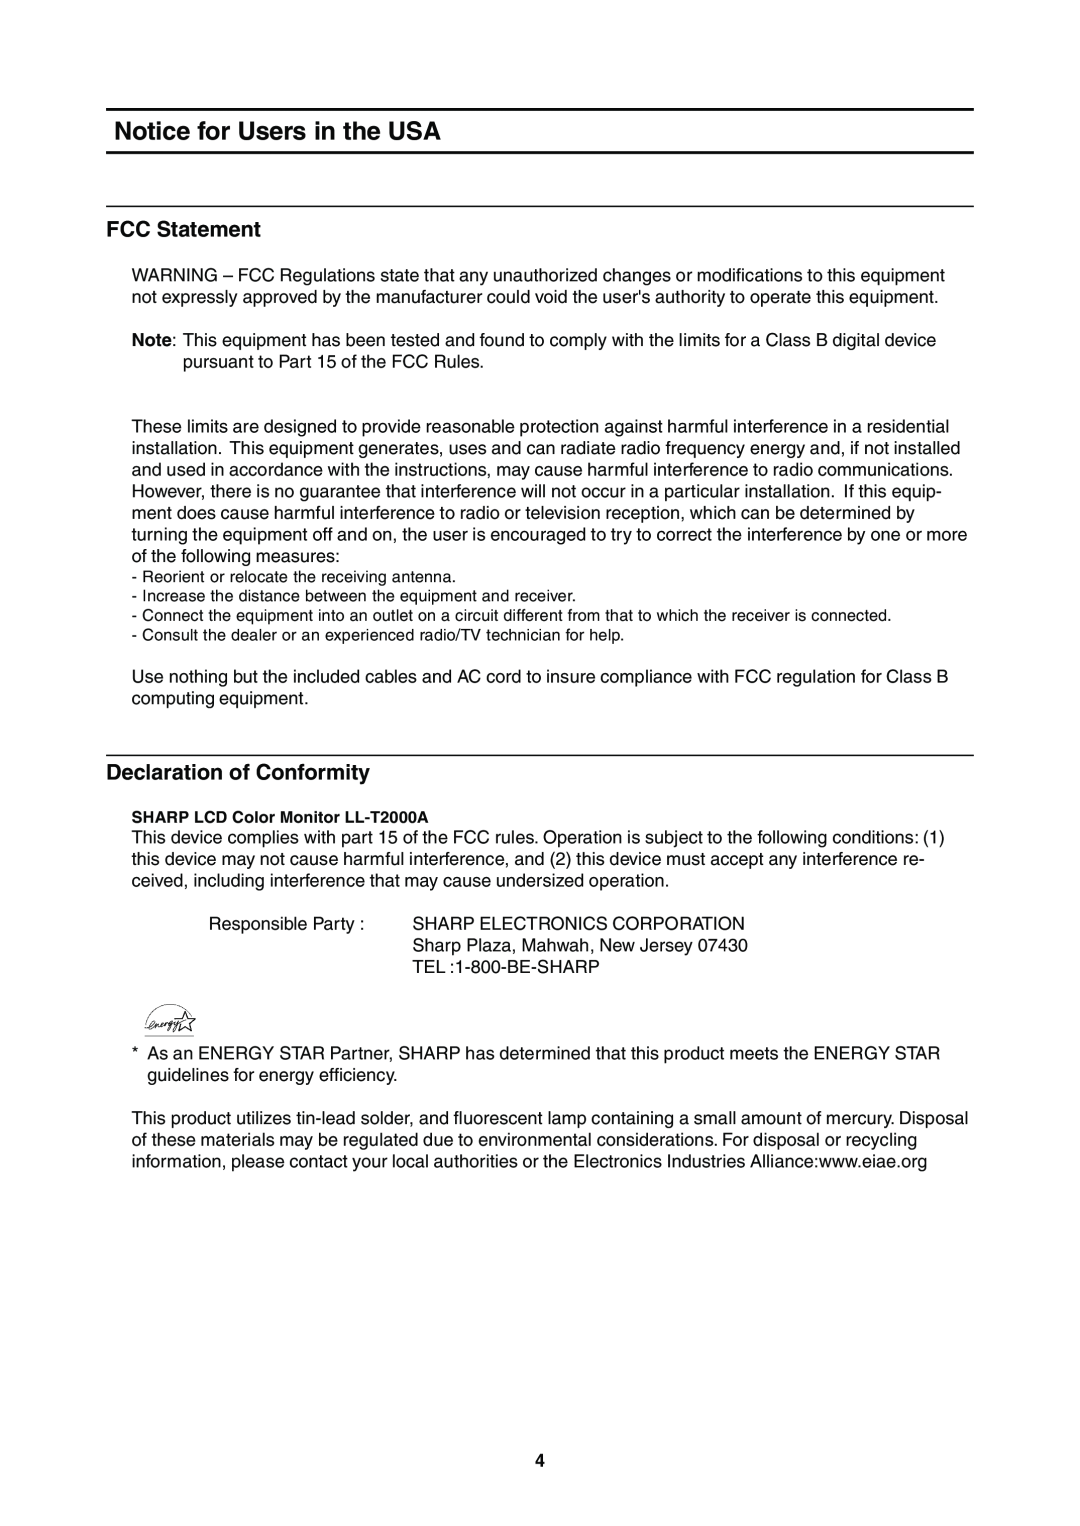 Sharp LL-T2000A operation manual Notice for Users in the USA, FCC Statement, Declaration of Conformity 